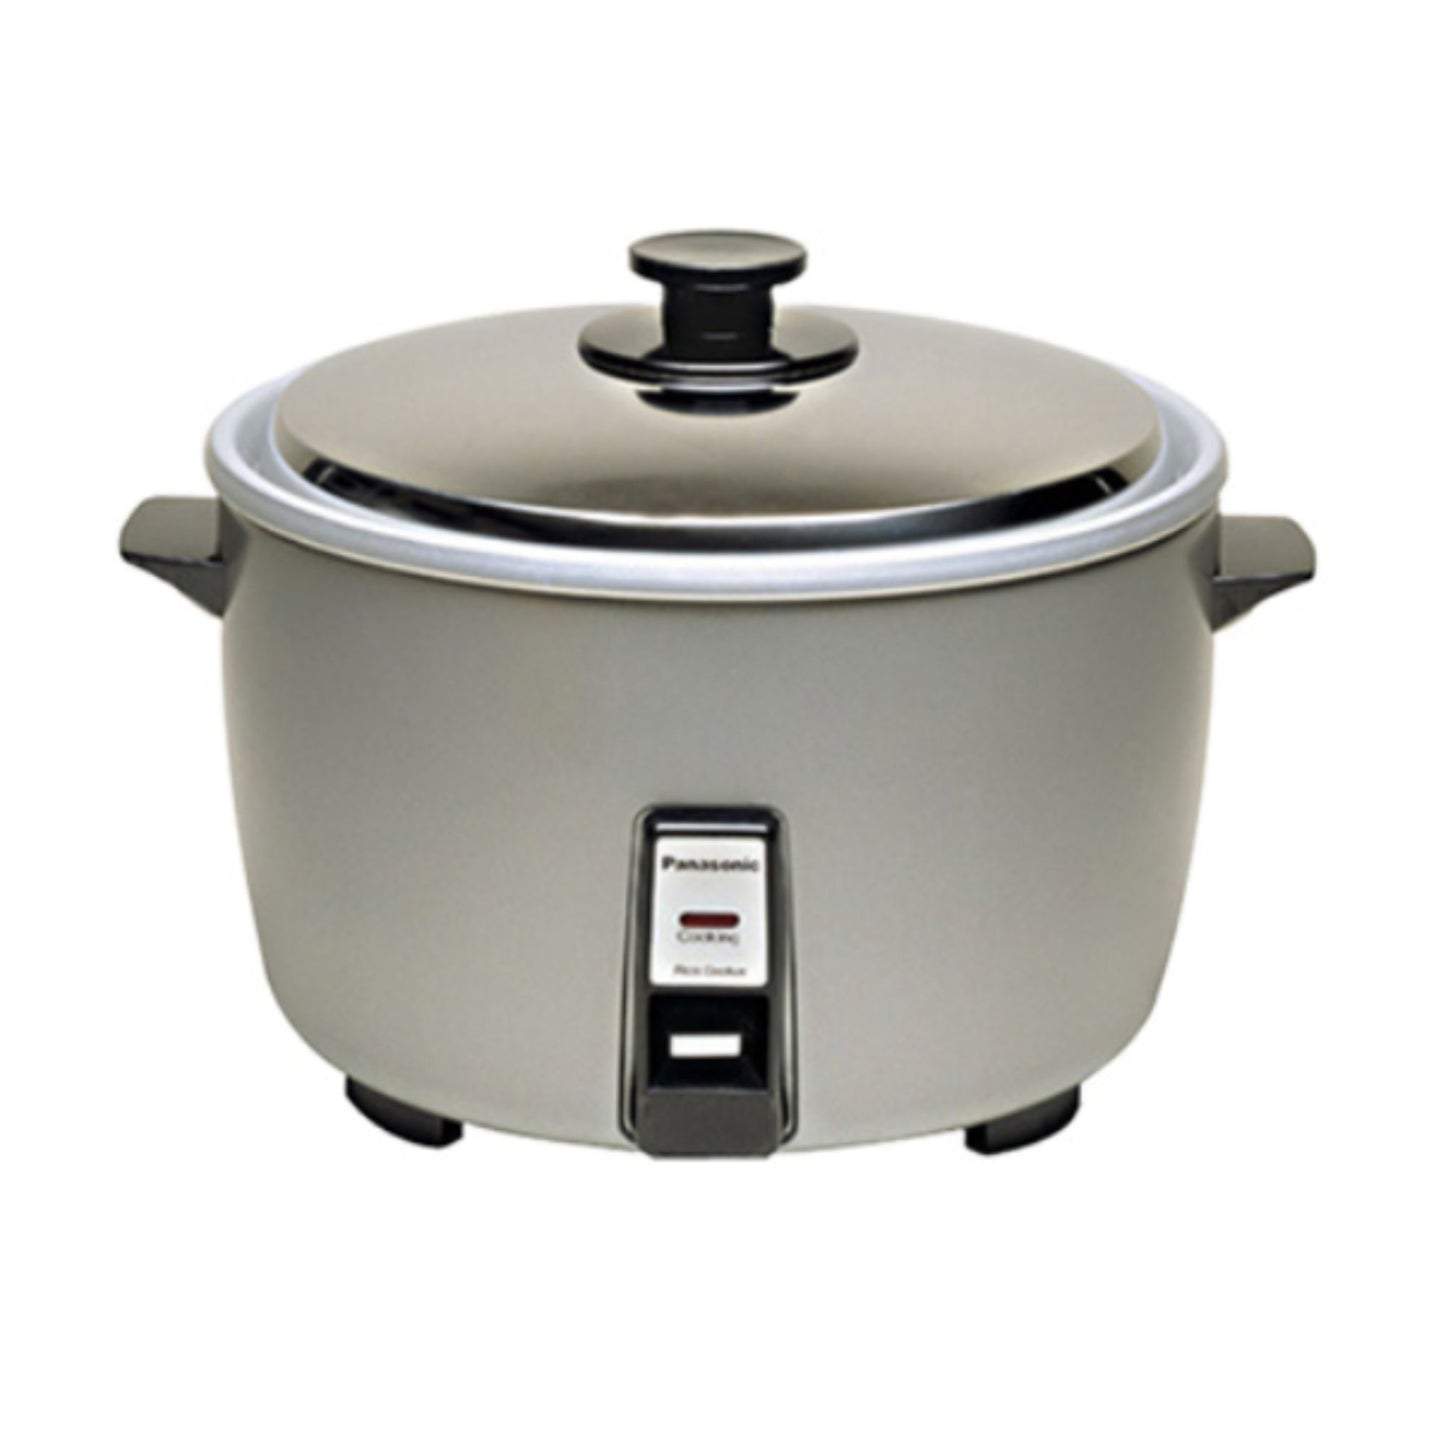 PANASONIC 40 CUPS ELECTRIC RICE COOKER